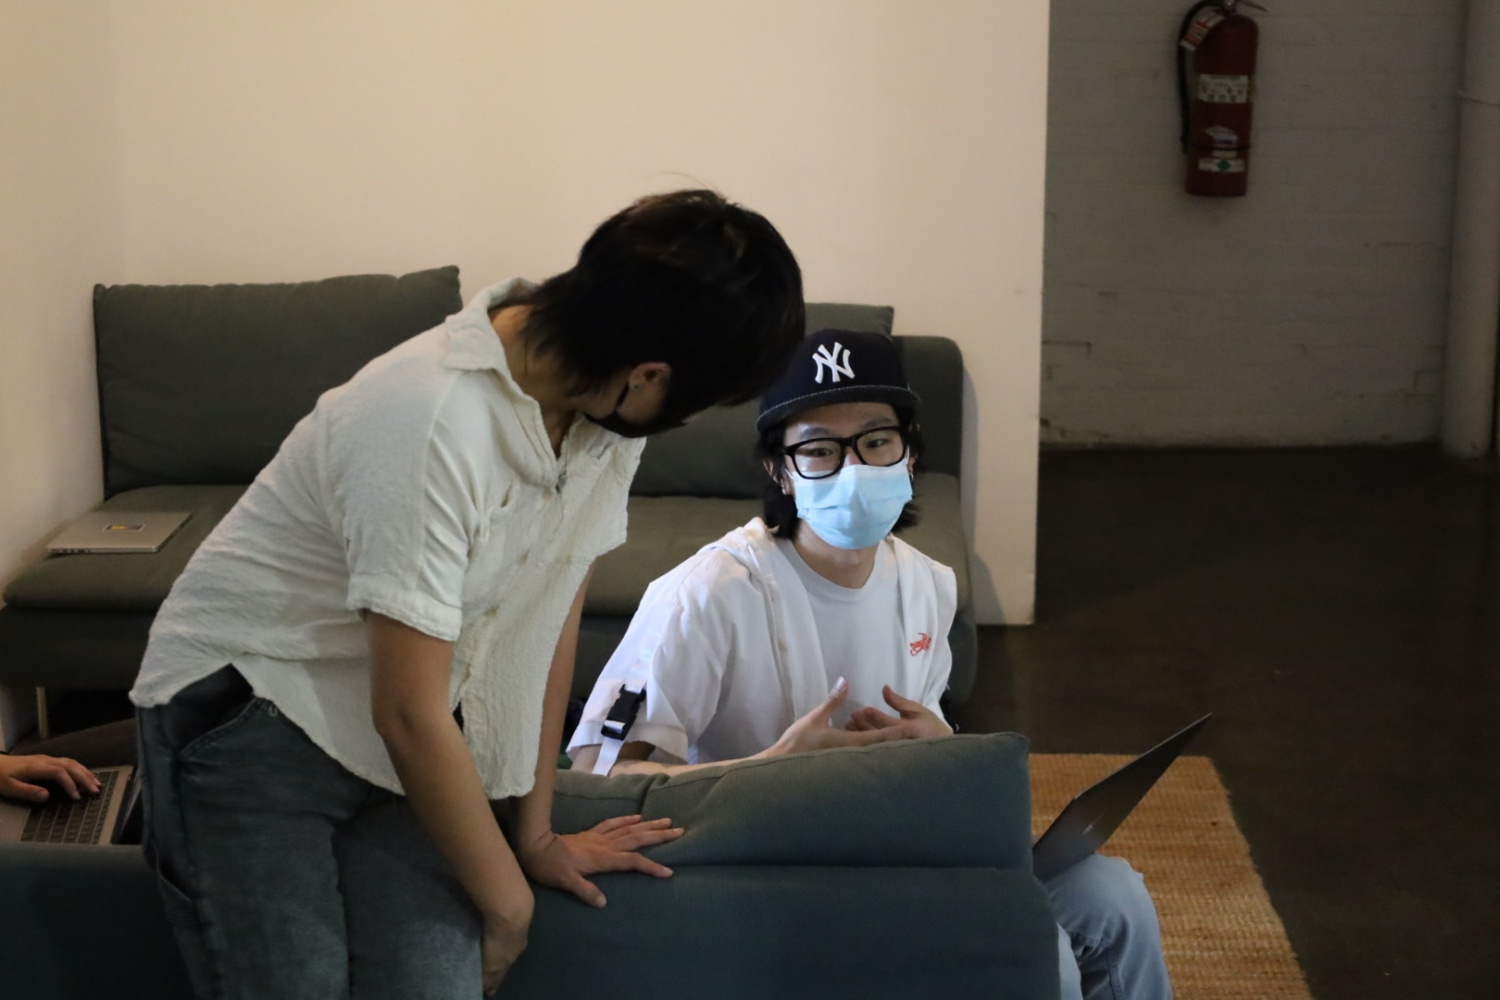 Xin Xin, who has short straight hair and wears a off-white blouse, is leaning against a green couch while talking to Roy Yang, who wears a mask and a New York baseball cap and has a laptop on his lap.